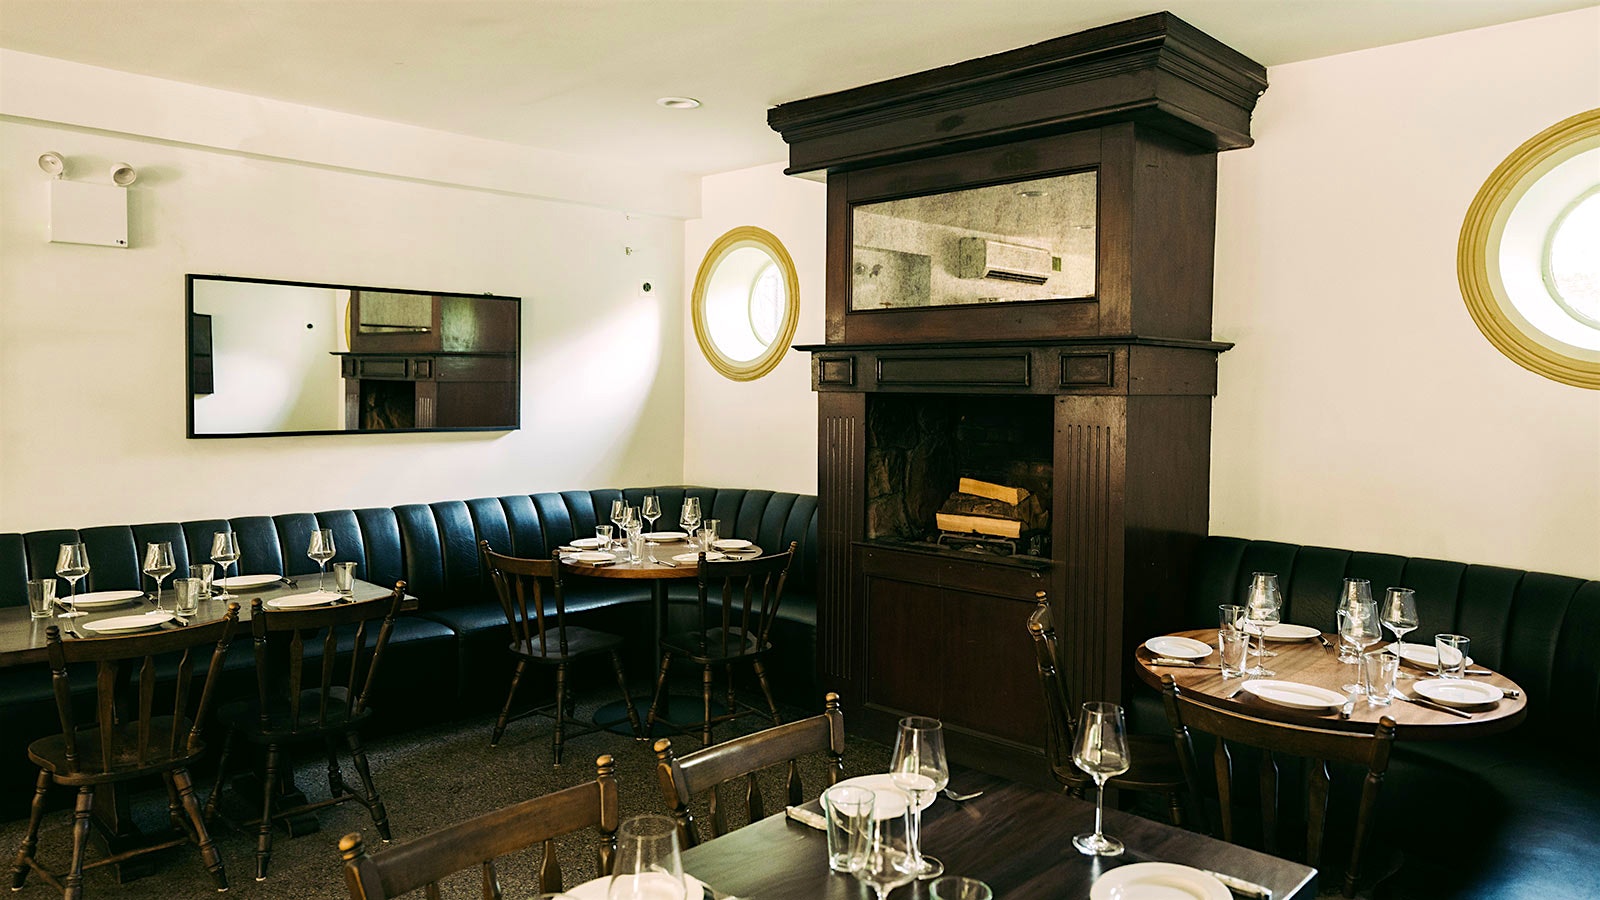  Dining room of Gus's chop house with dark banquettes, dark wood tables and fireplace mantle